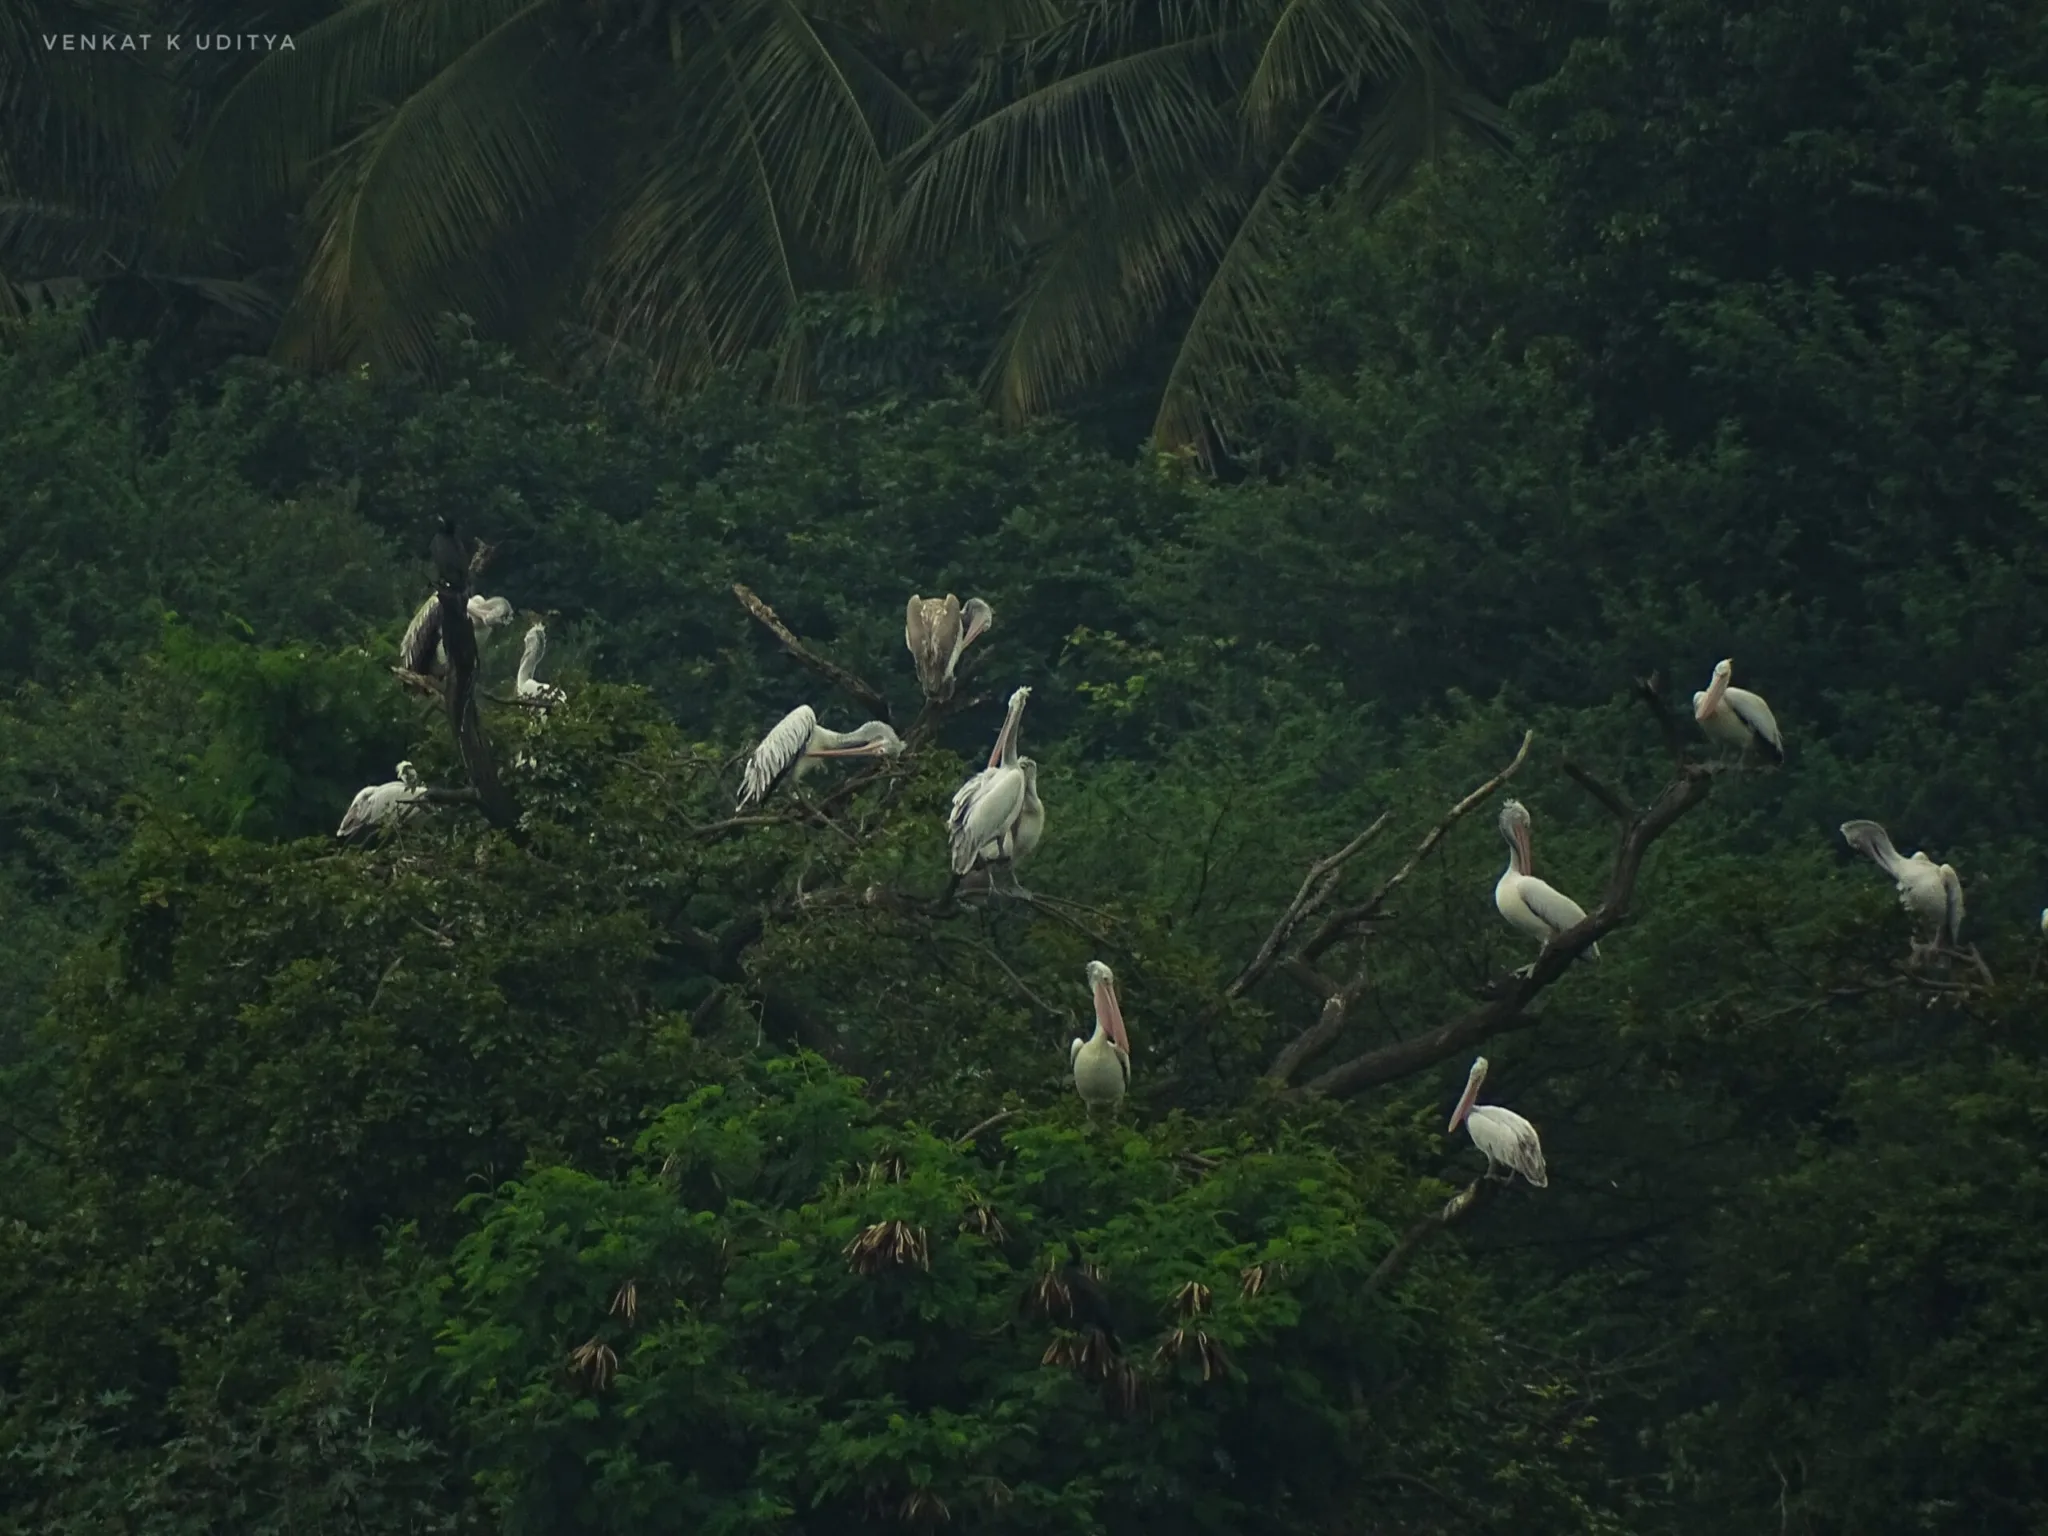 Spot-billed Pelicans at roost on the island trees